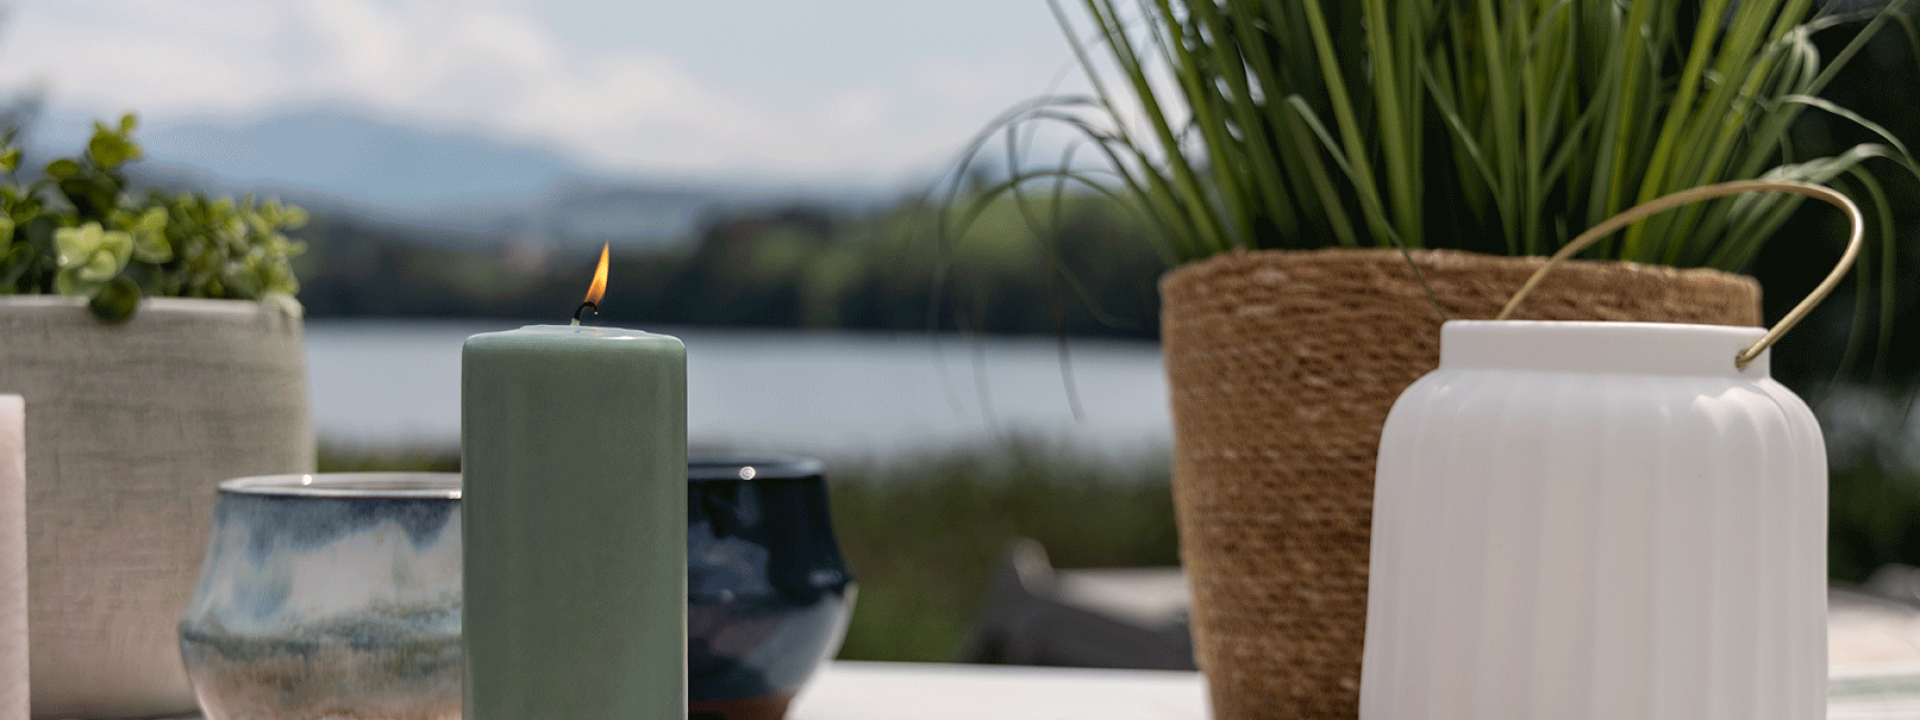 Swiss natural candle healbalance sommersortiment s 086837 web